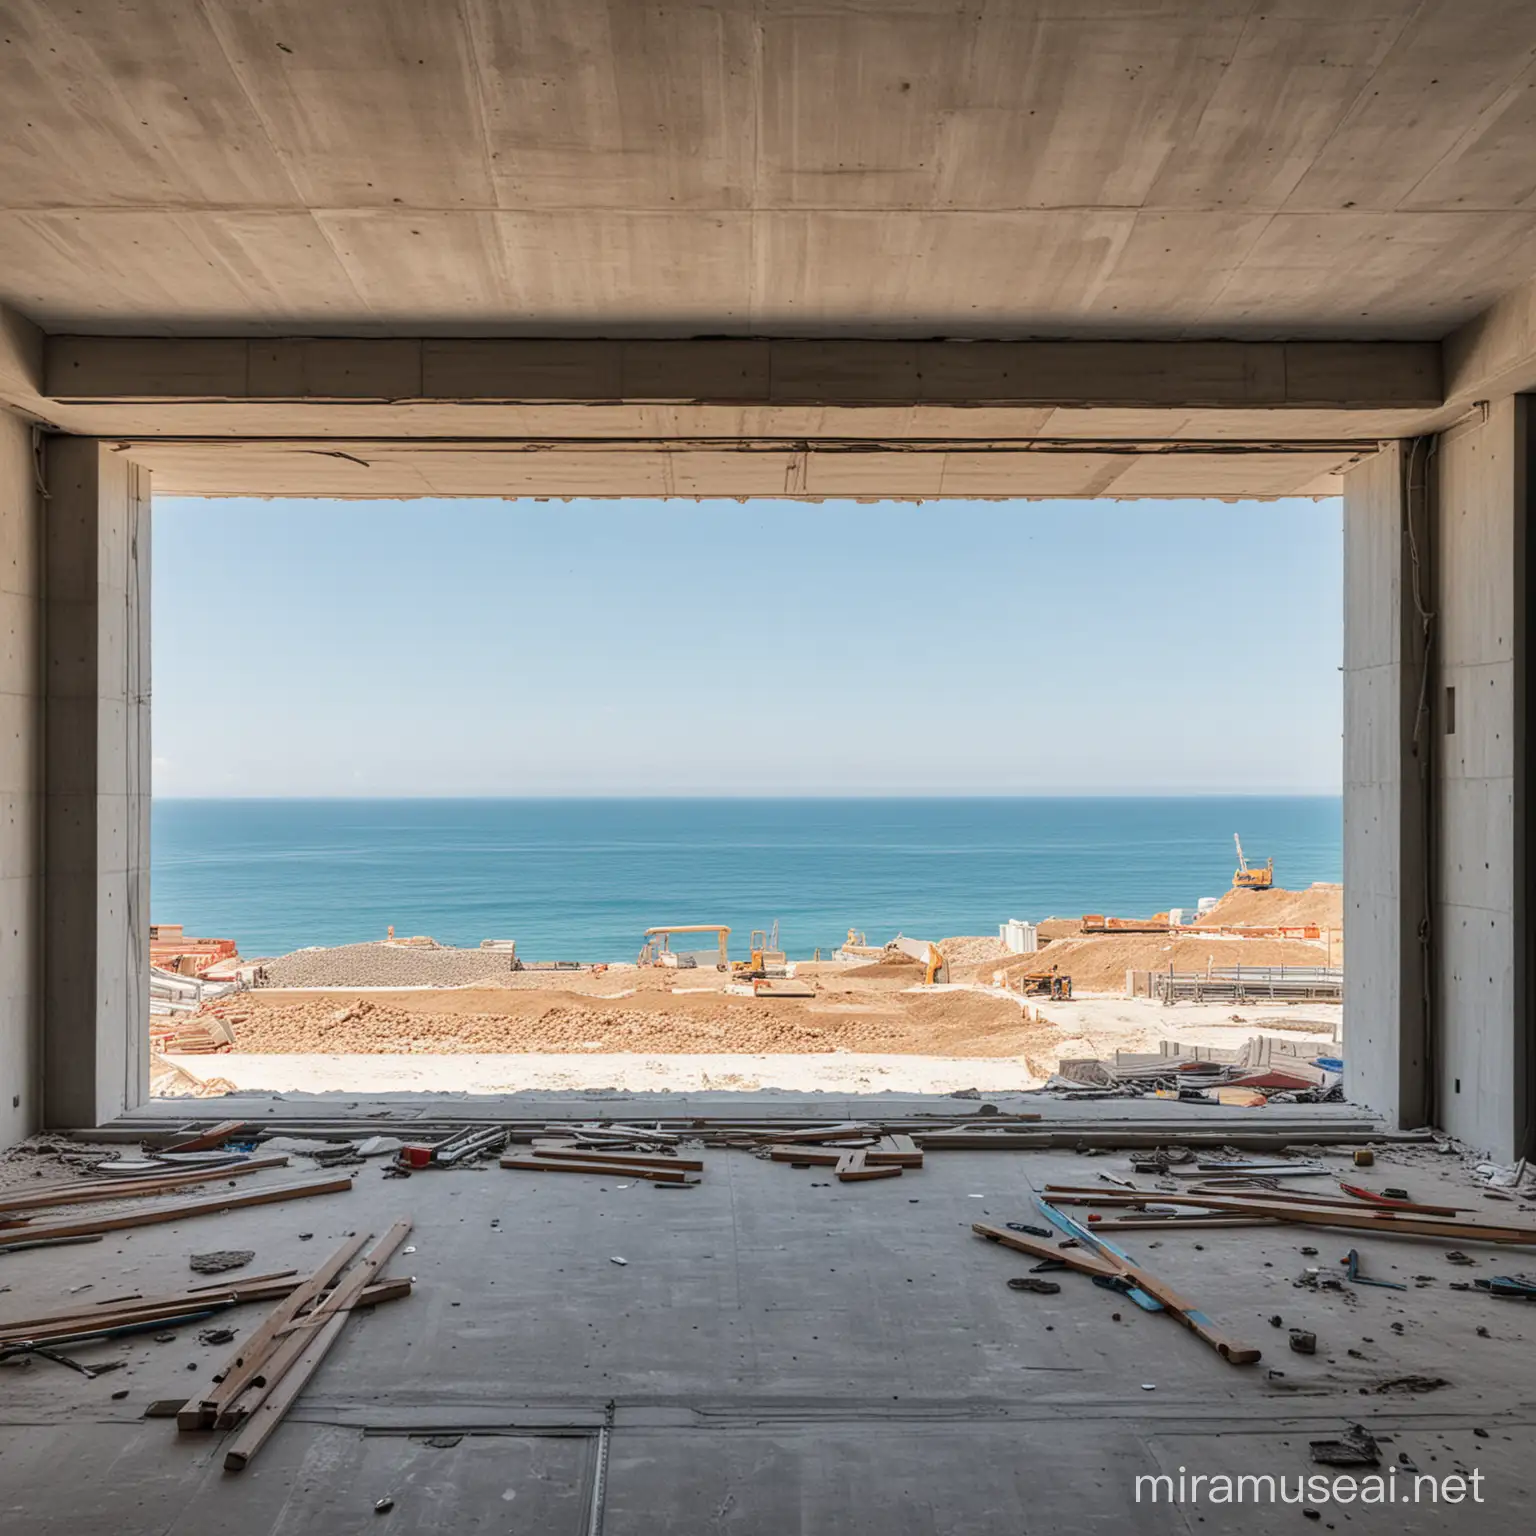 make a photo of a modern and sleek construction site from a modern villa near the sea with views of it. The view of the photo is from the interior of the construction site. There are no workers and is broad daylight.